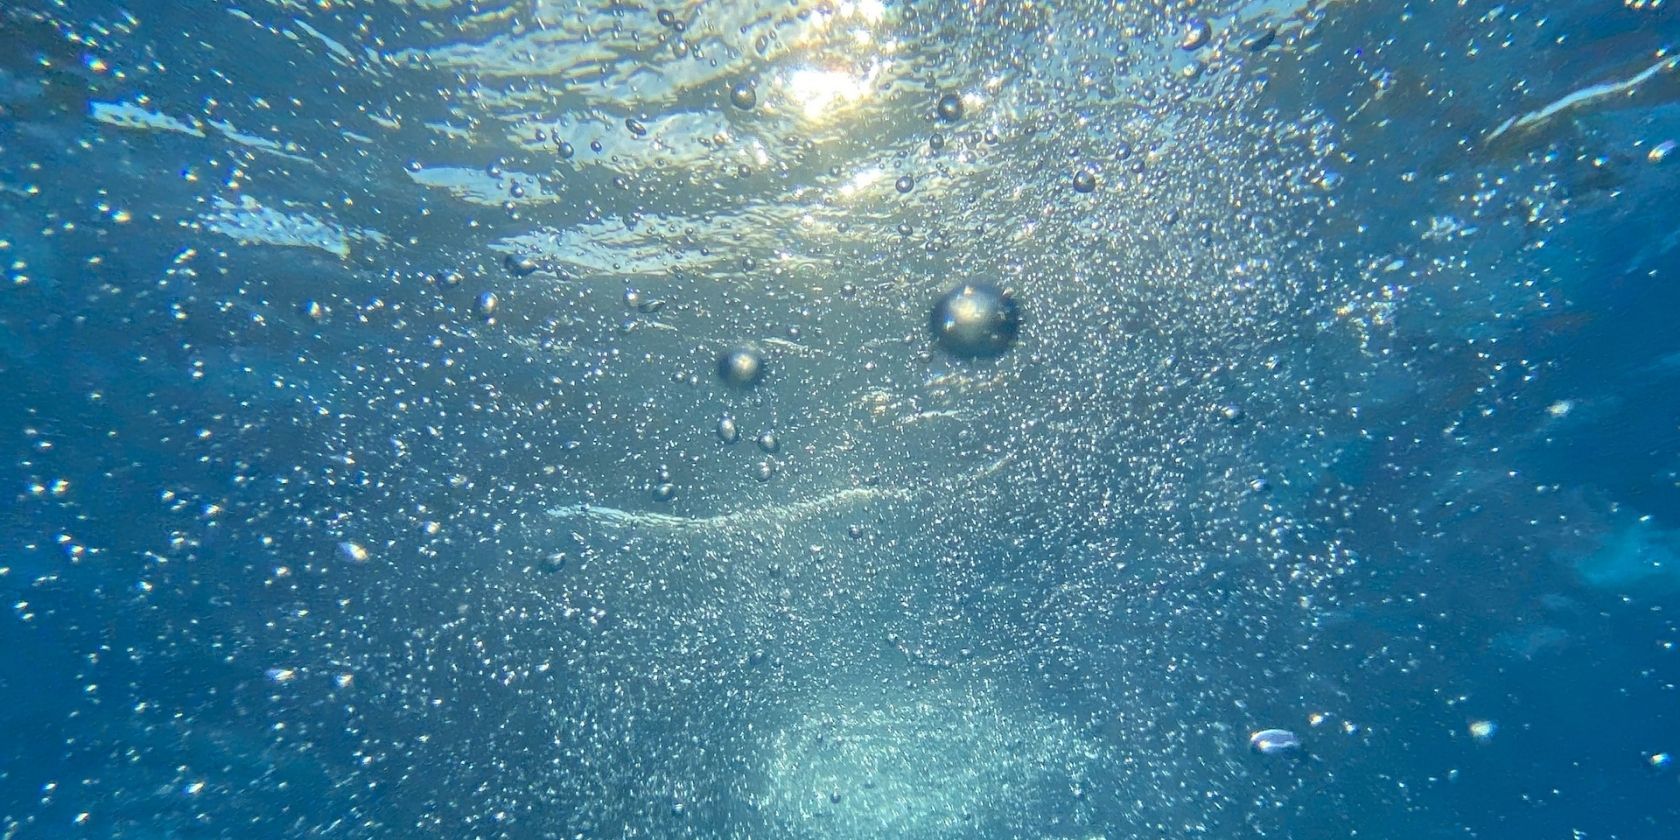 blue underwater image with lots of small bubbles